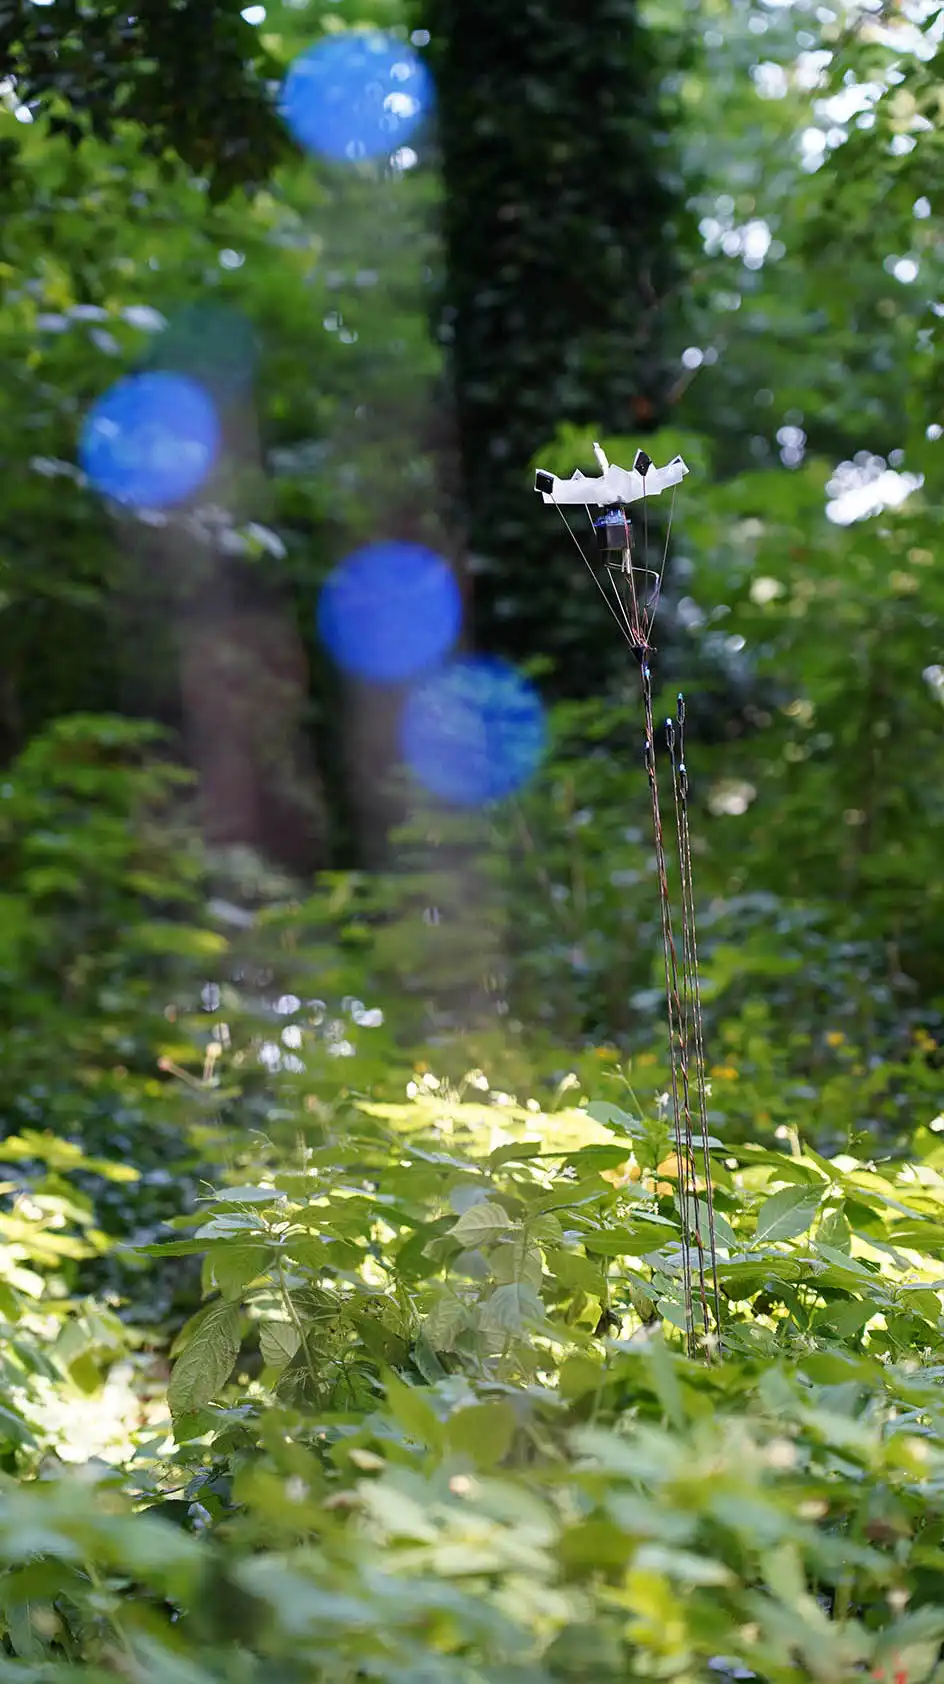 bokeh of some lights in the foreground. slim rods with lights and a blossom attatched at the top are standing in a green and lush field in nature